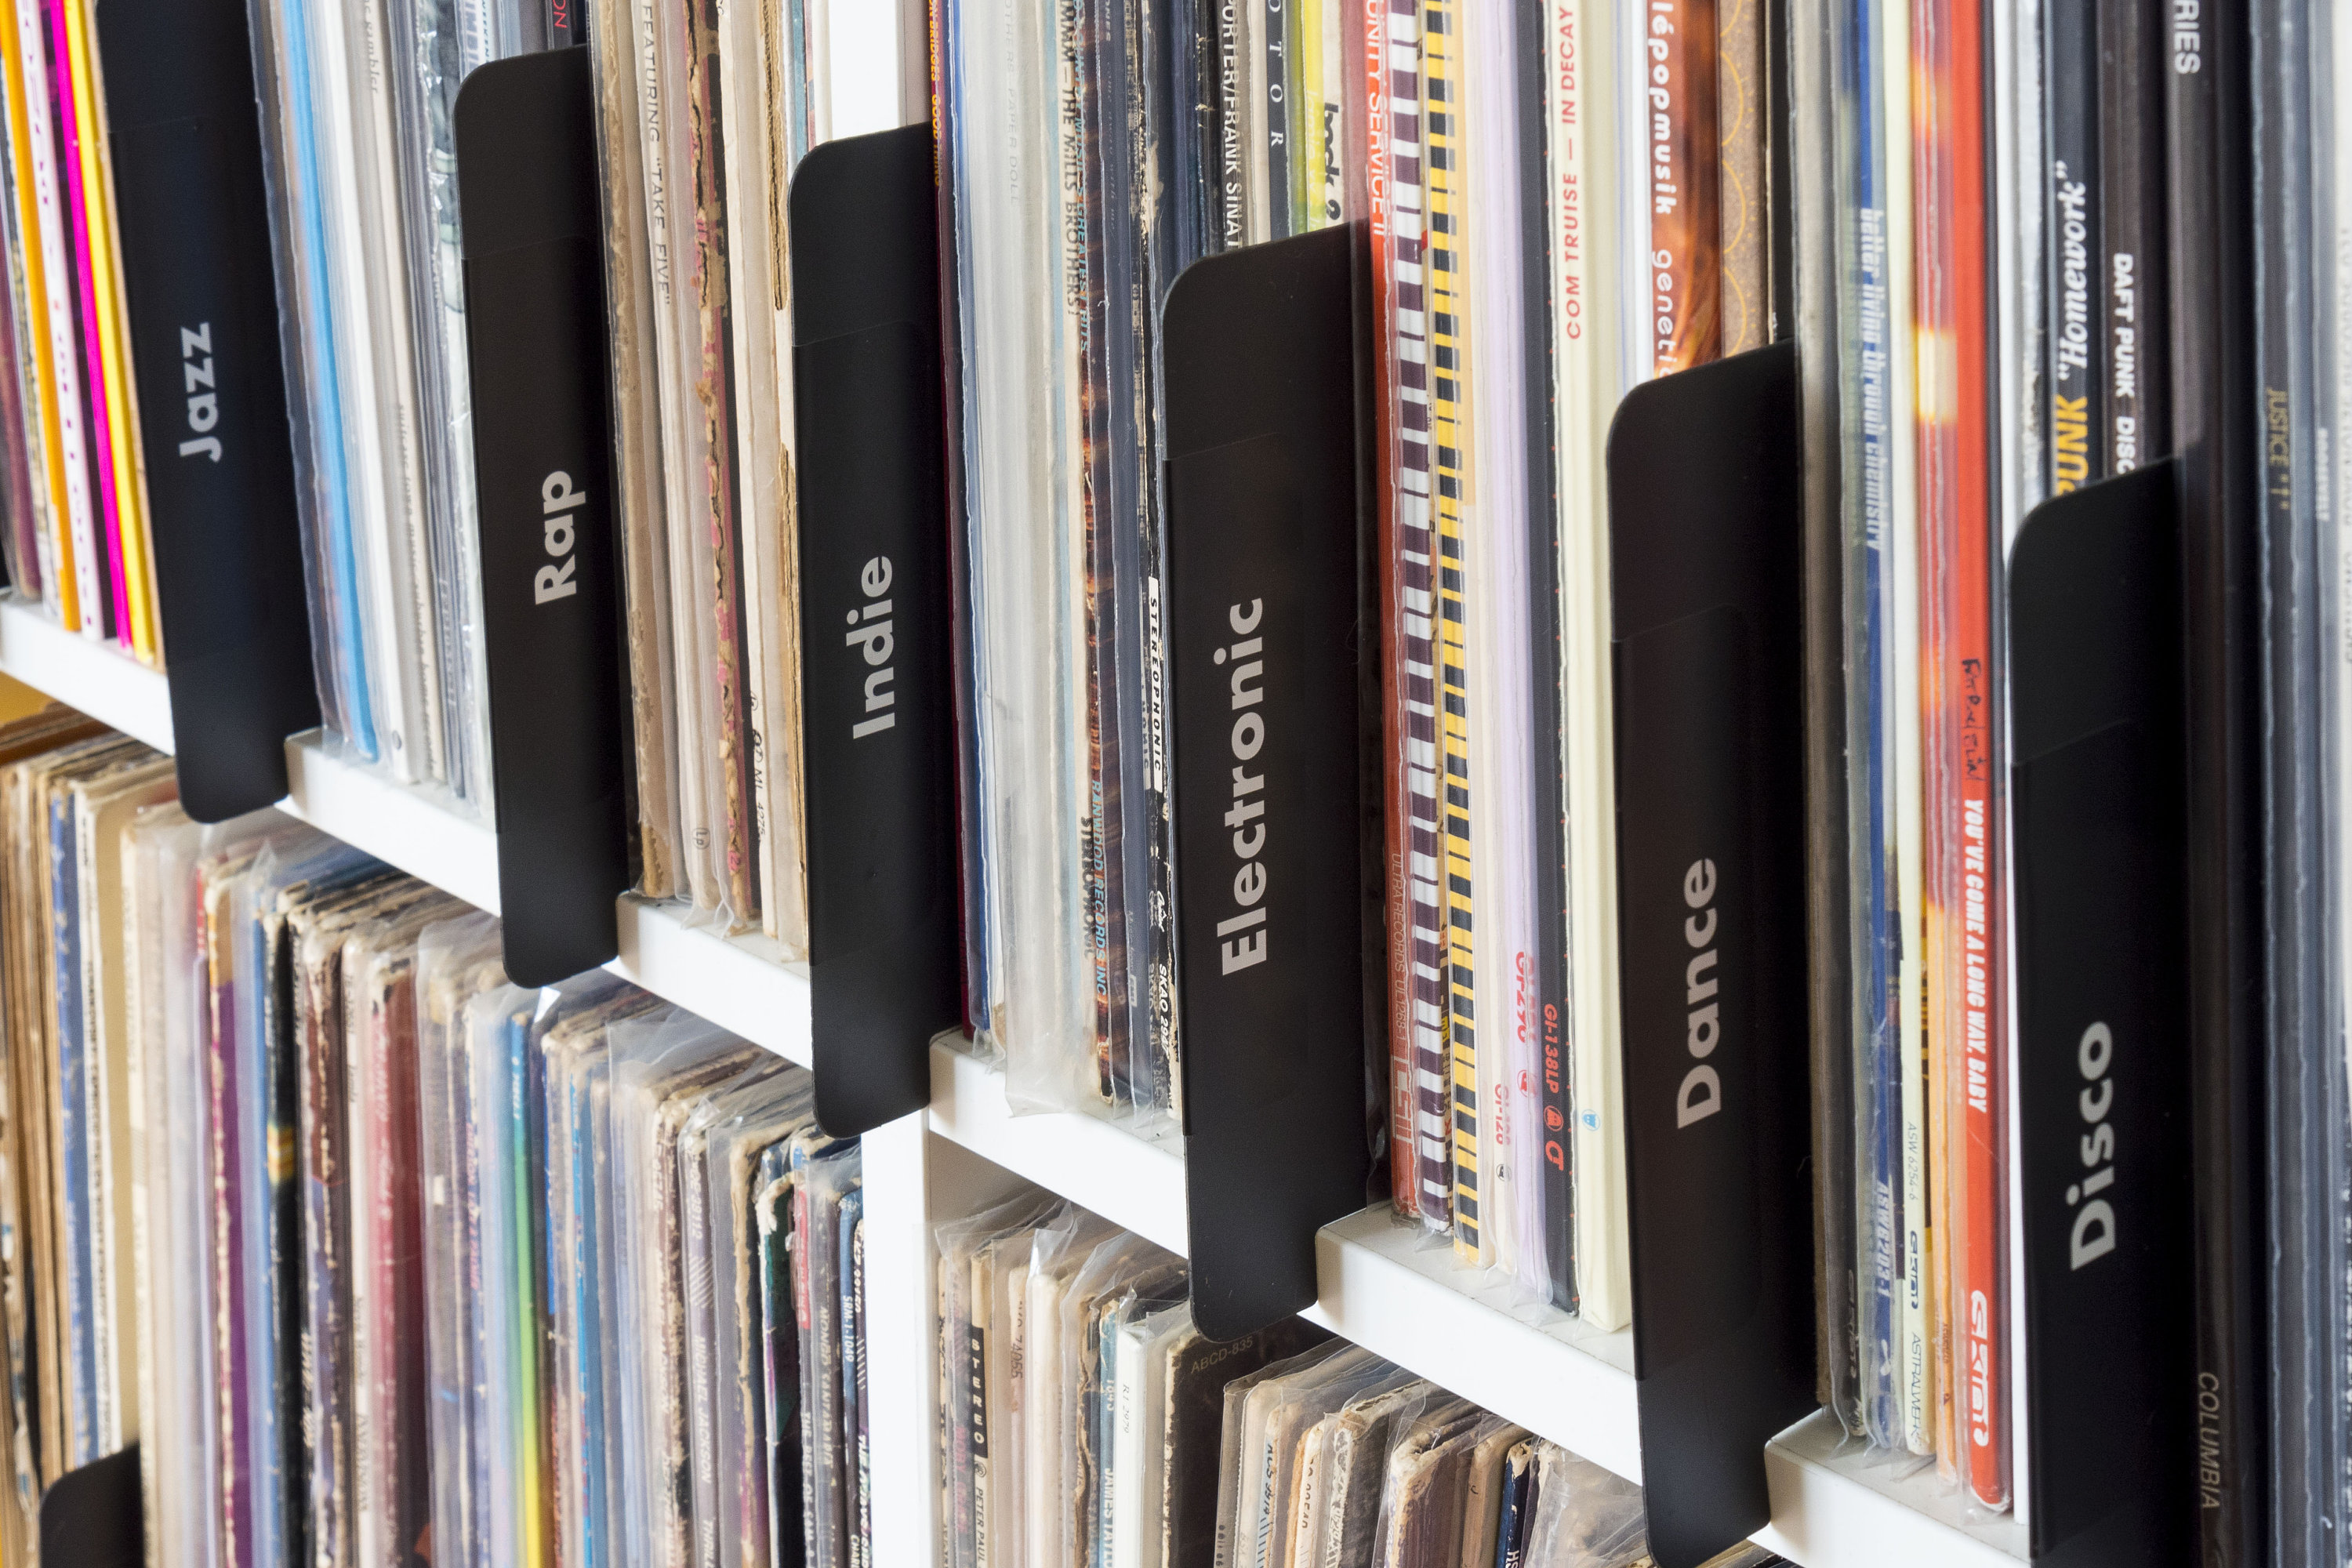 Vinyl Records with tags or an organized site structure?